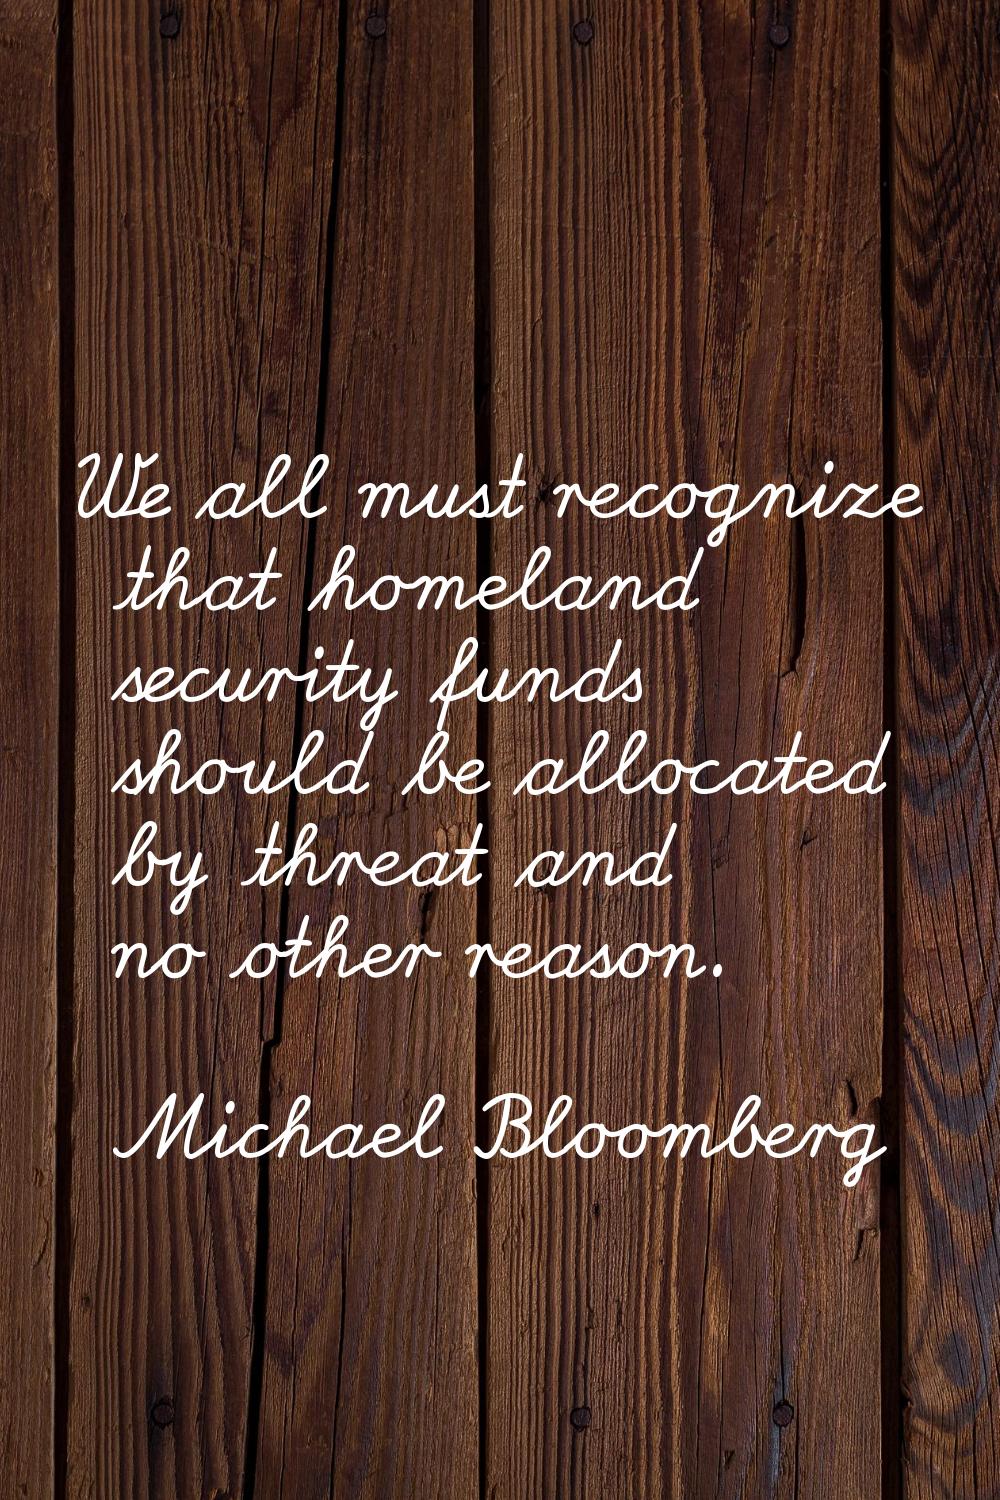 We all must recognize that homeland security funds should be allocated by threat and no other reaso